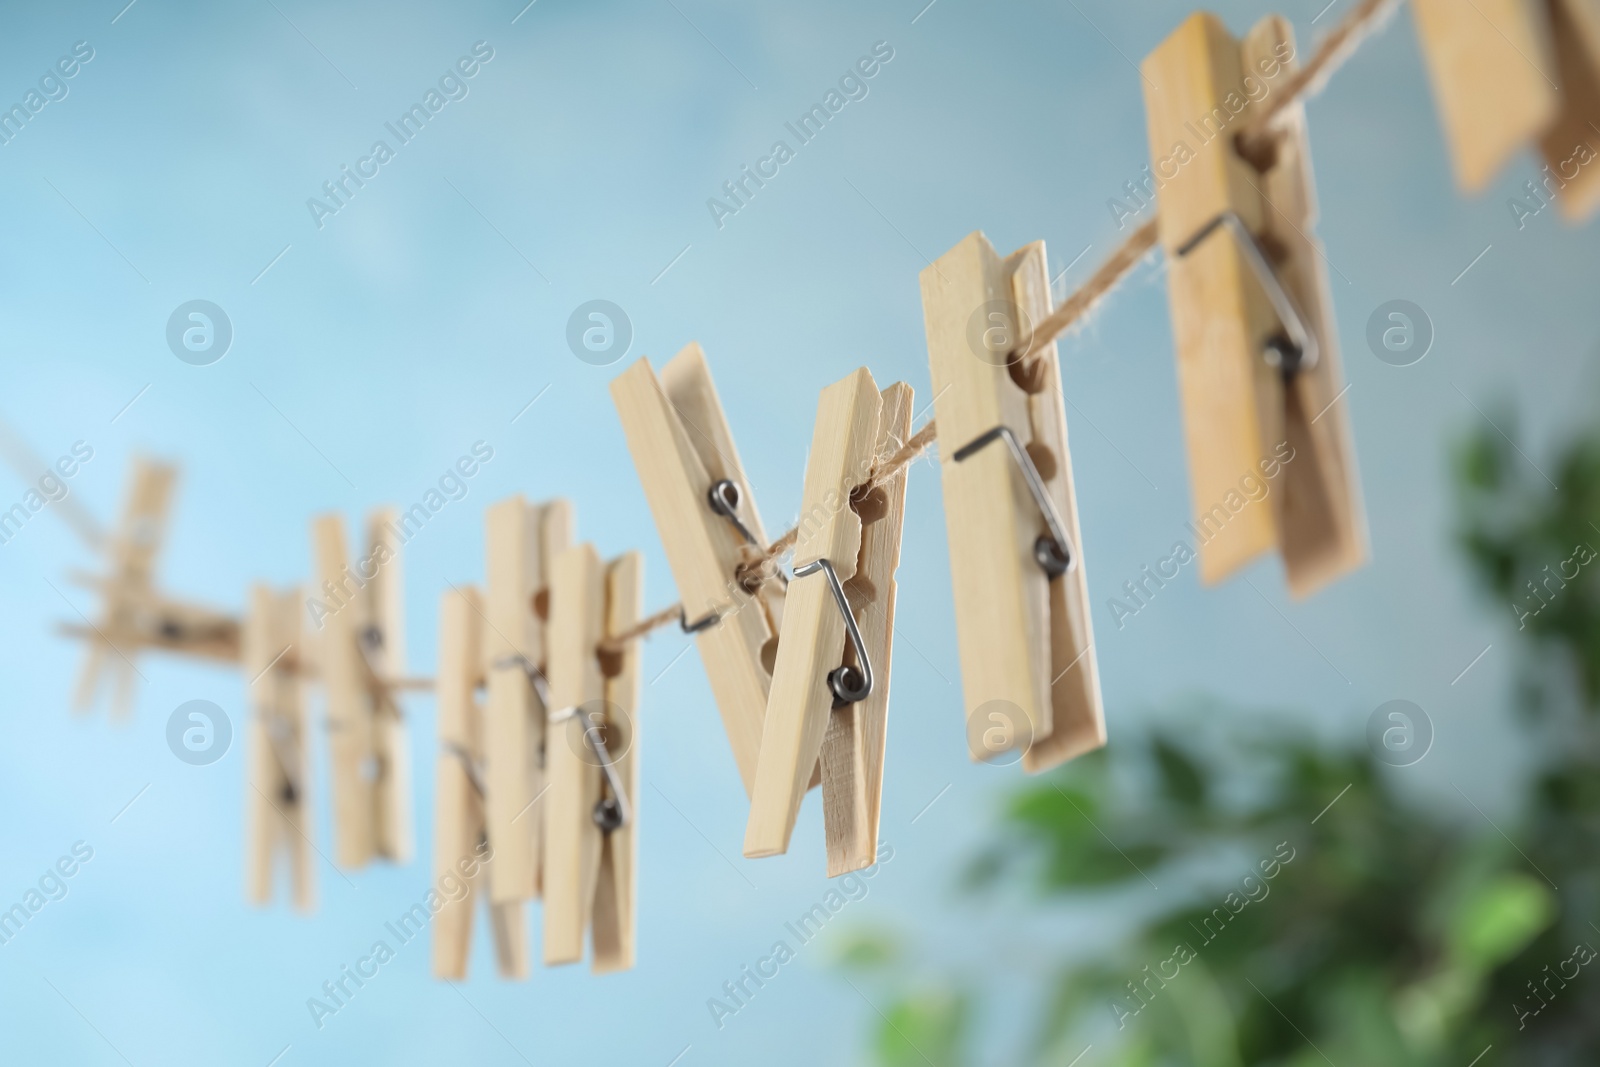 Photo of Wooden clothespins hanging on washing line against blurred background, closeup